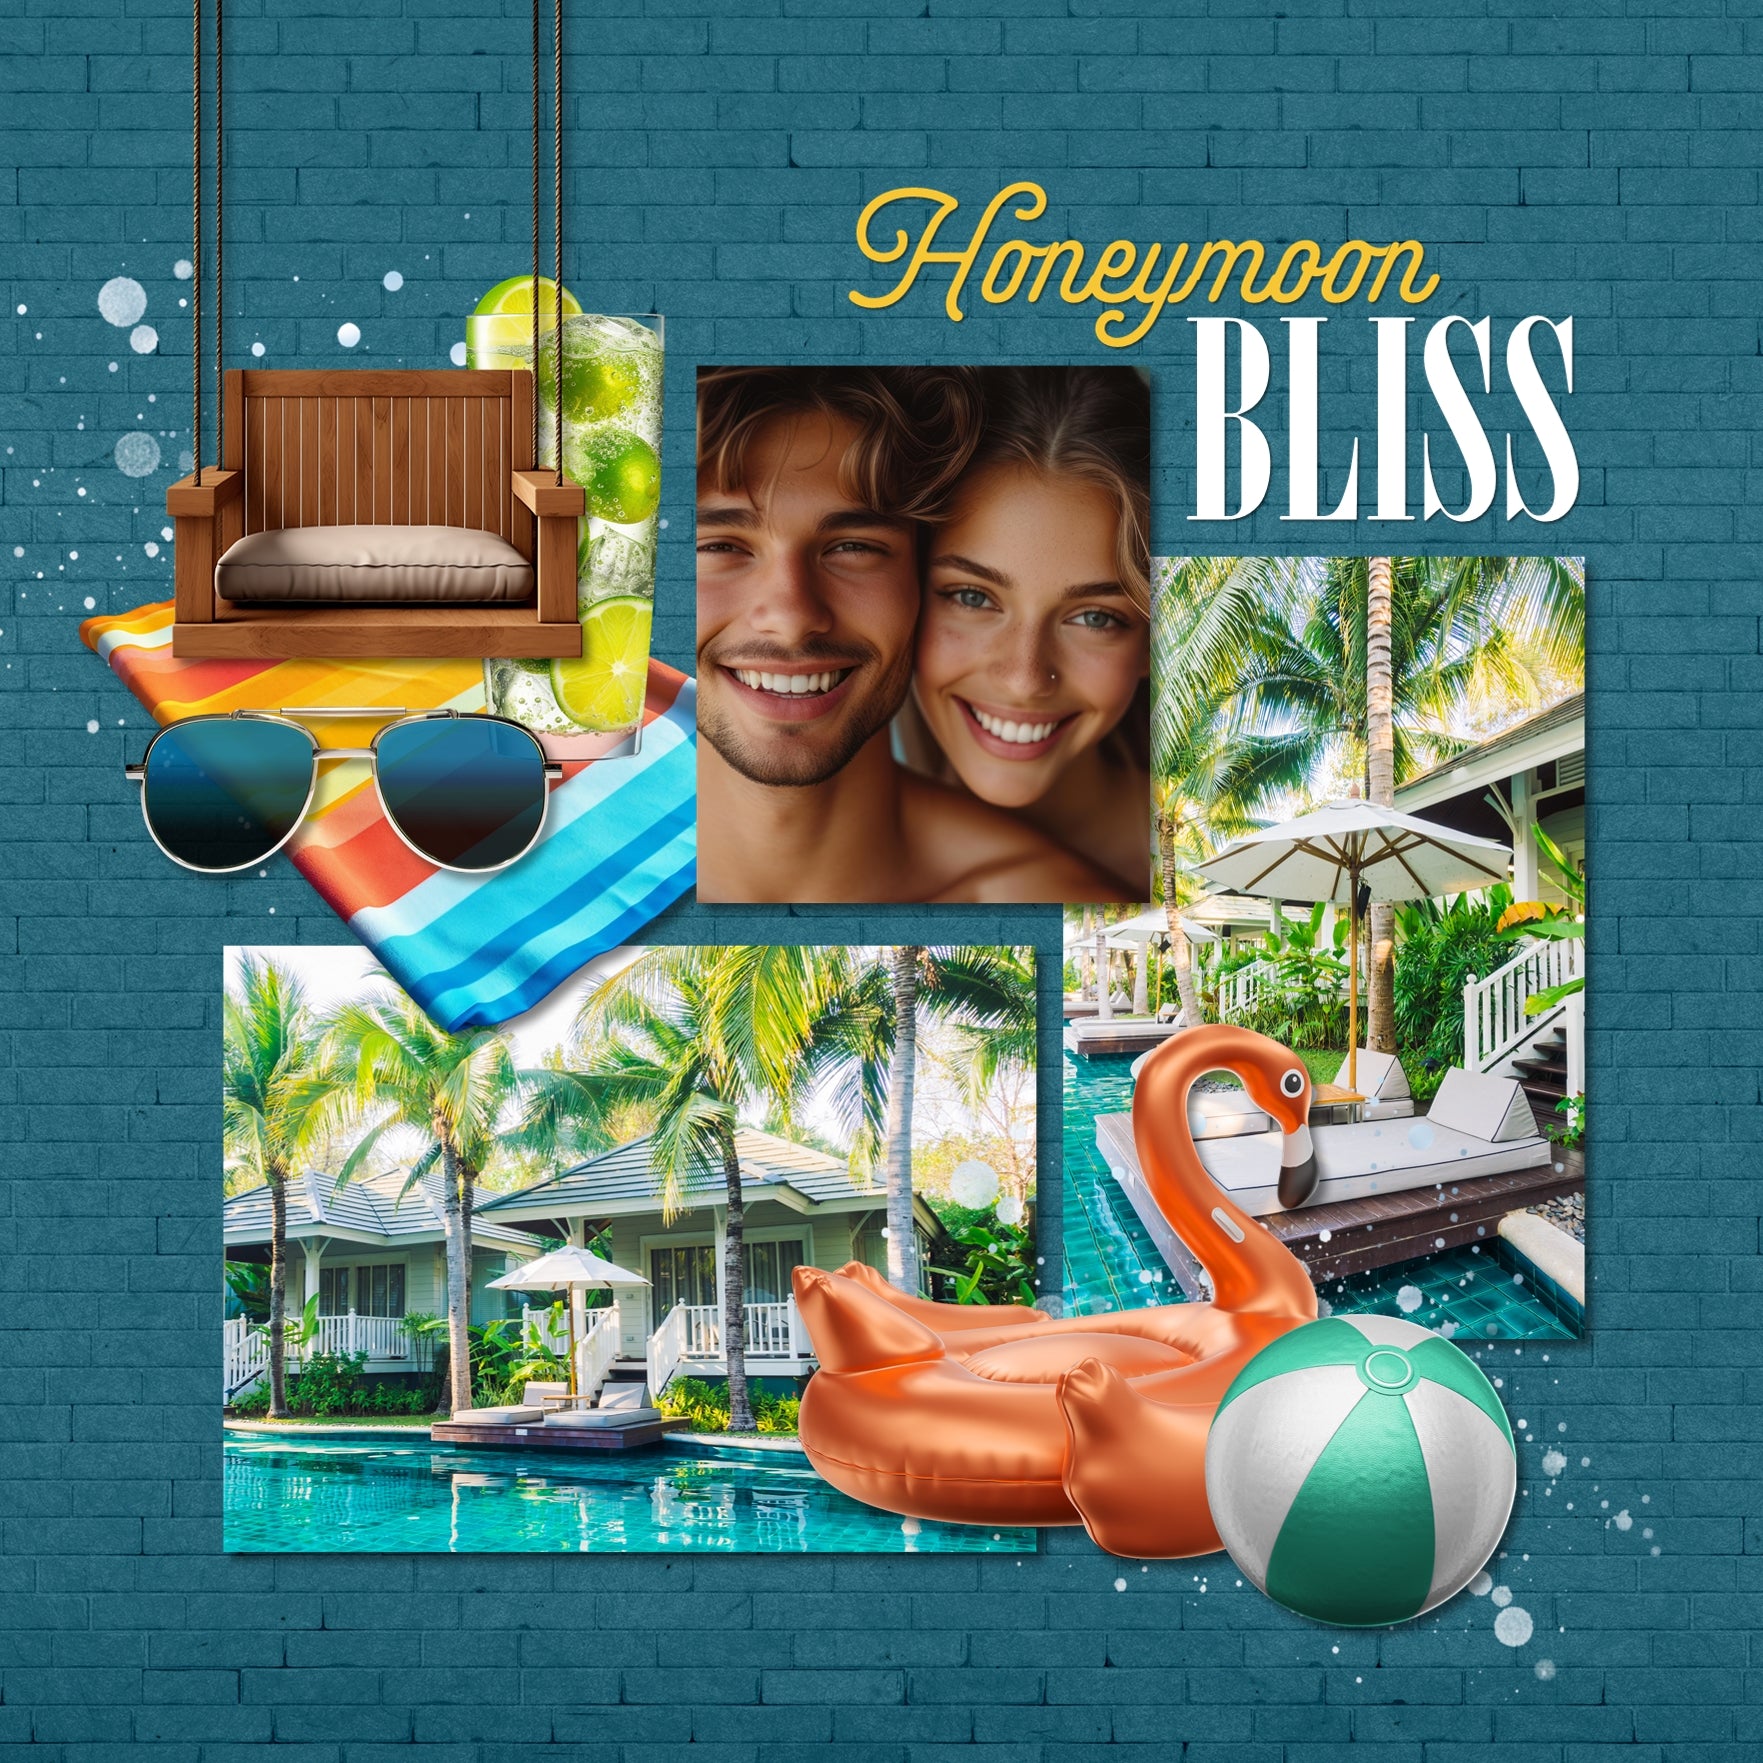 Great for vacations and holidays, these realistic digital scrapbooking pool embellishments by Lucky Girl Creative digital art will add that realistic touch to all your pages featuring poolside adventures and lounging in the sun. Also great for those that love playing in the tropical water, have a pool in their home, cruise ships, or enjoy waterslides and waterparks.